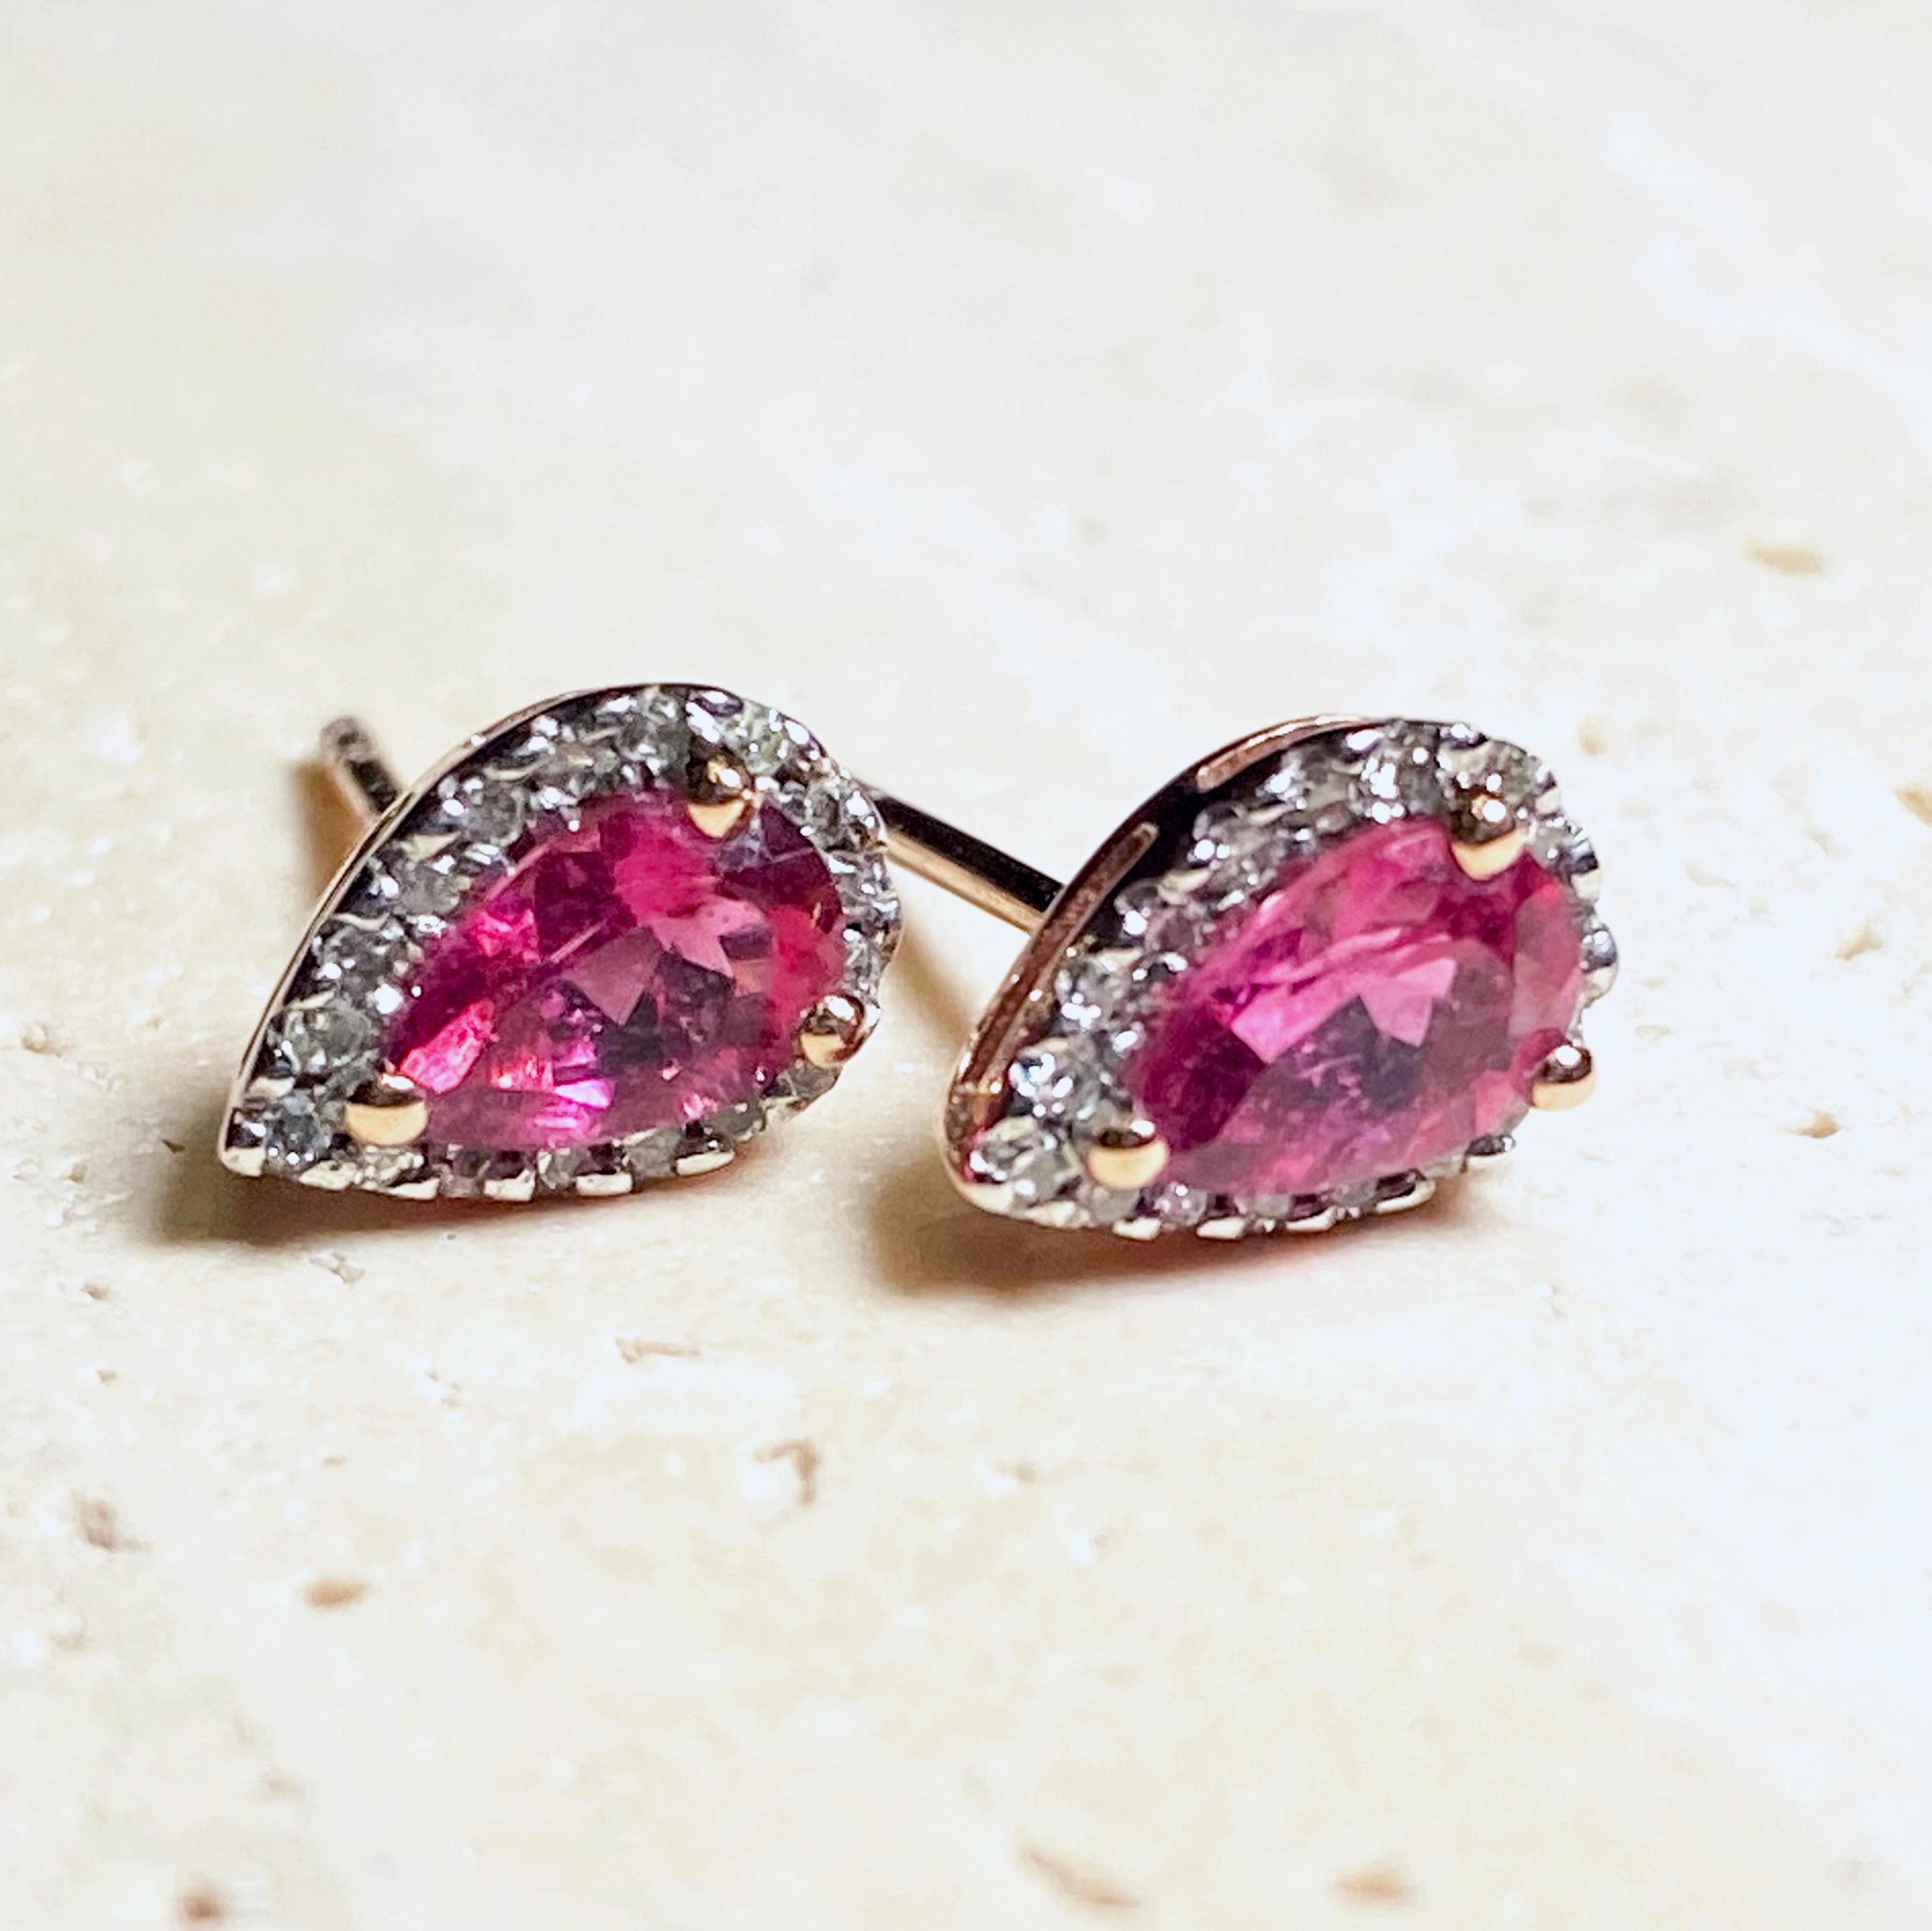 An elegant ode to summertime and Monet's beloved Poppy Fields, these 9-karat solid gold earrings, featuring pear-shaped tourmalines artfully adorned with 0.20 carats of round-cut diamonds, encapsulate the joy of a leisurely stroll.

Material: 9 kt